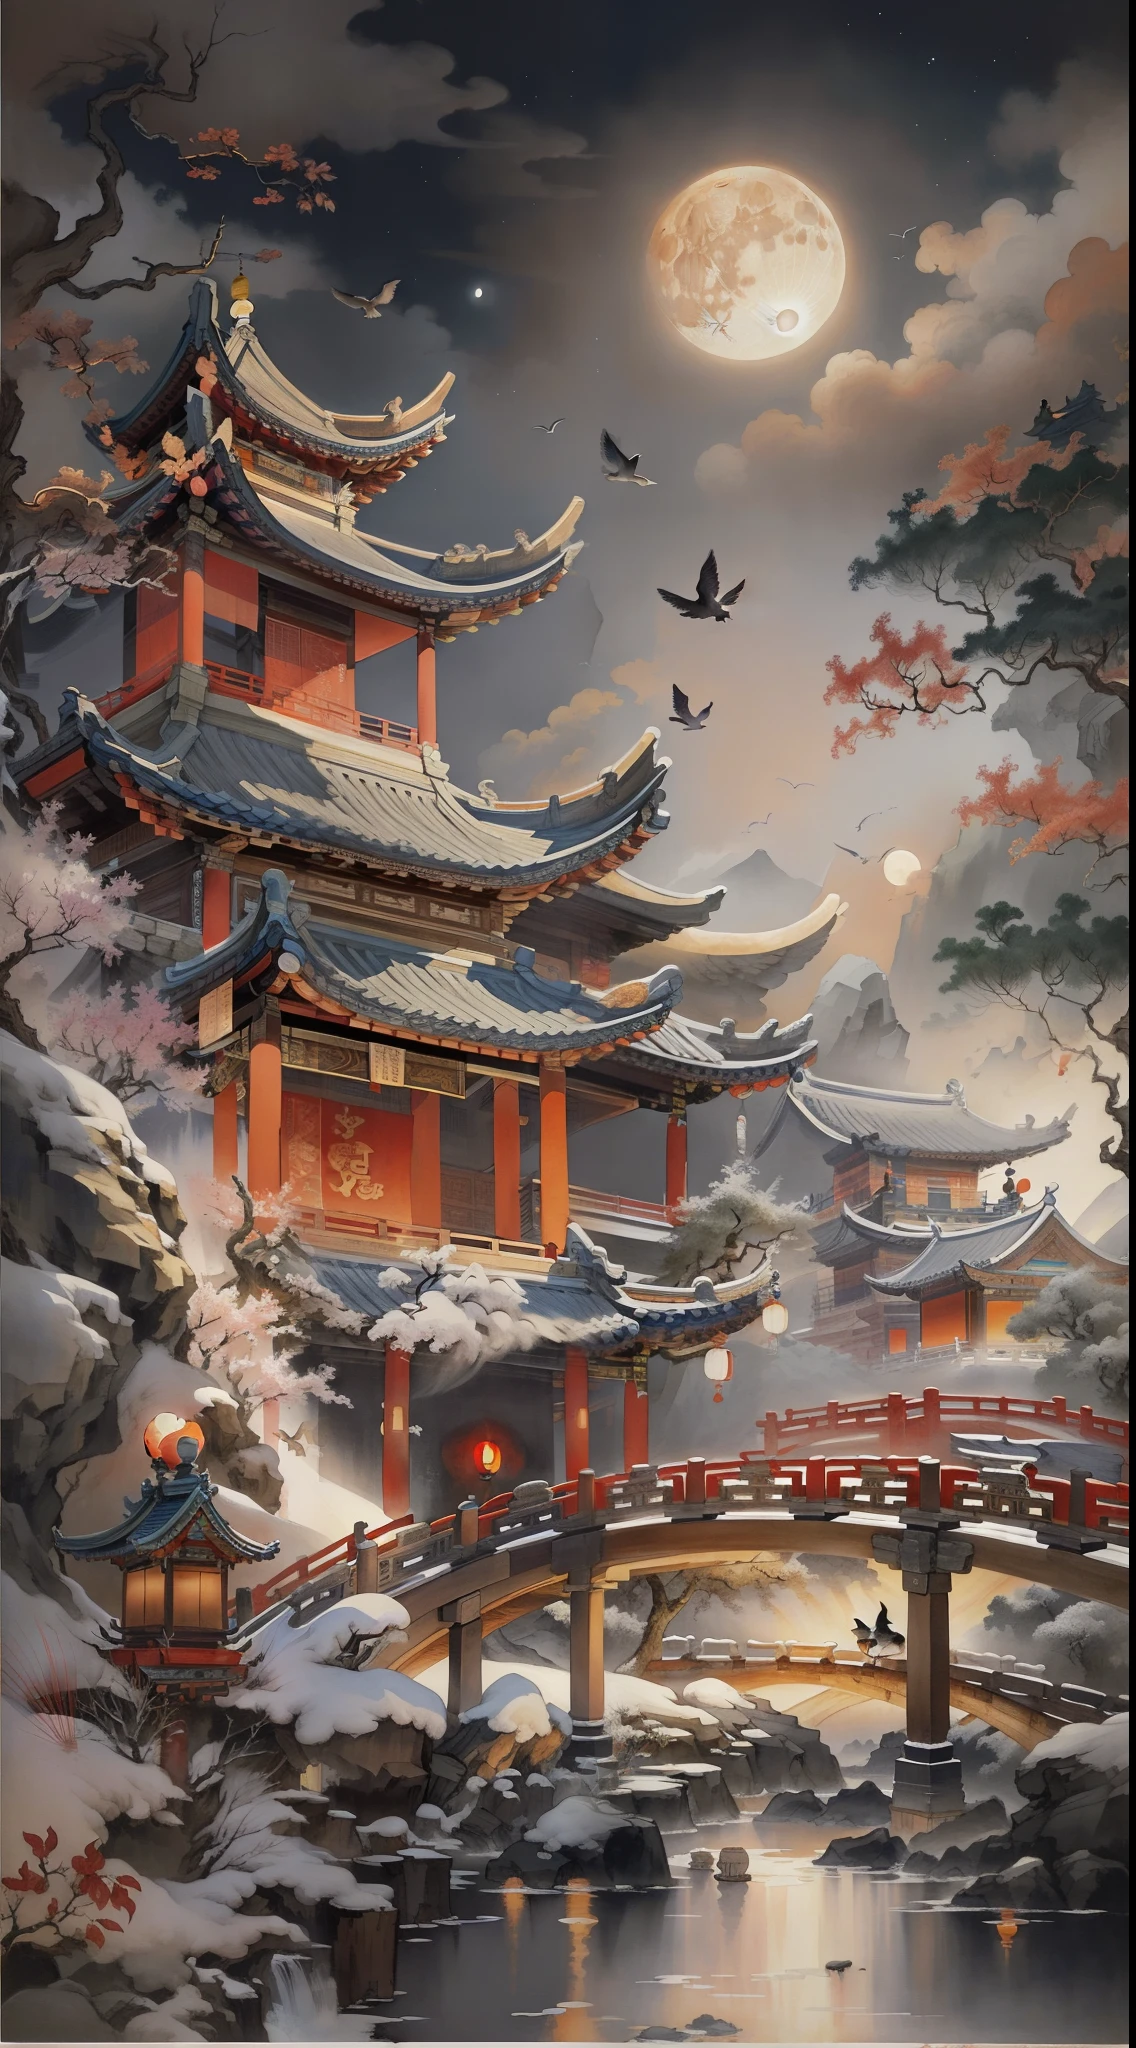 Ancient Chinese landscapes，the night，Ancient buildings，Pavilions，Carved beams and paintings，A wooden bridge hangs high in the air，A couple on the bridge holding hands，There is a huge full moon in the background，There are birds in the air，Inspired by Jin Yong martial arts，Ink painting style，clean color，Decisive cut，Leave white space，impressionistic，tmasterpiece，ultra-detailliert，Epic composition, high qulity, HighestQuali，pixar-style，Supersaturation，hyper realisitc，Art germ --v 6